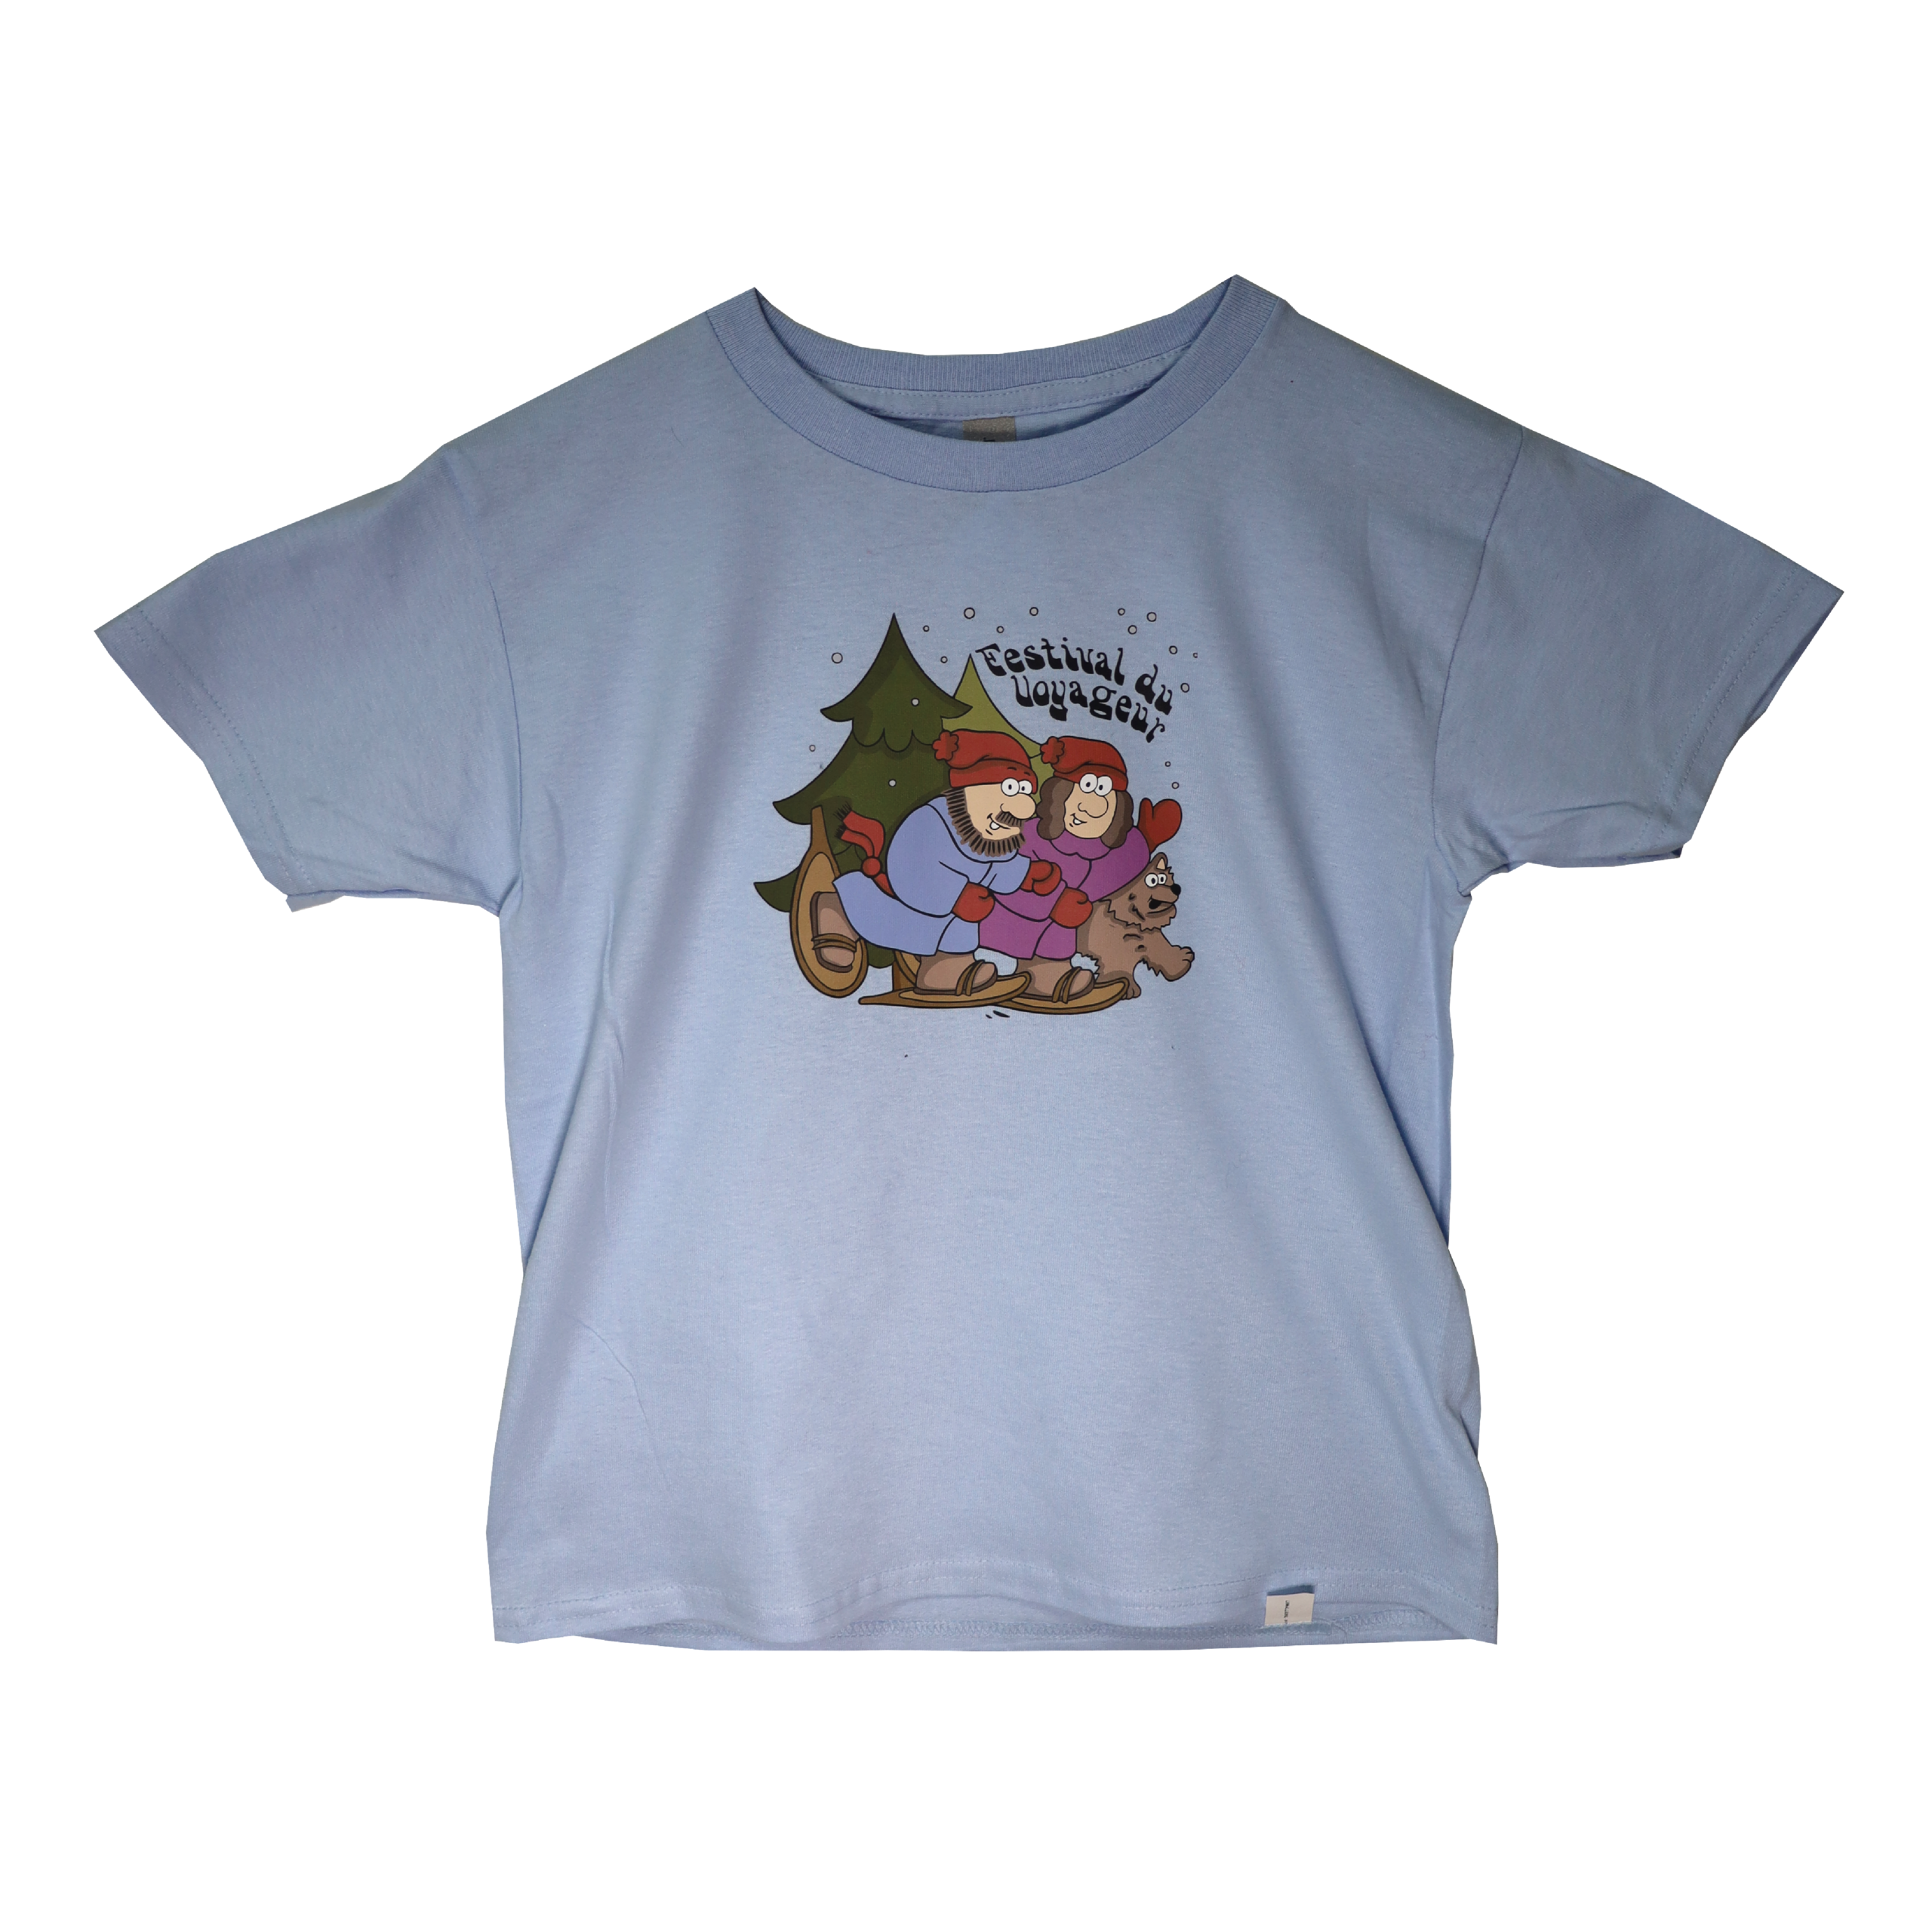 Featured image for “T-SHIRT RAQUETTE”